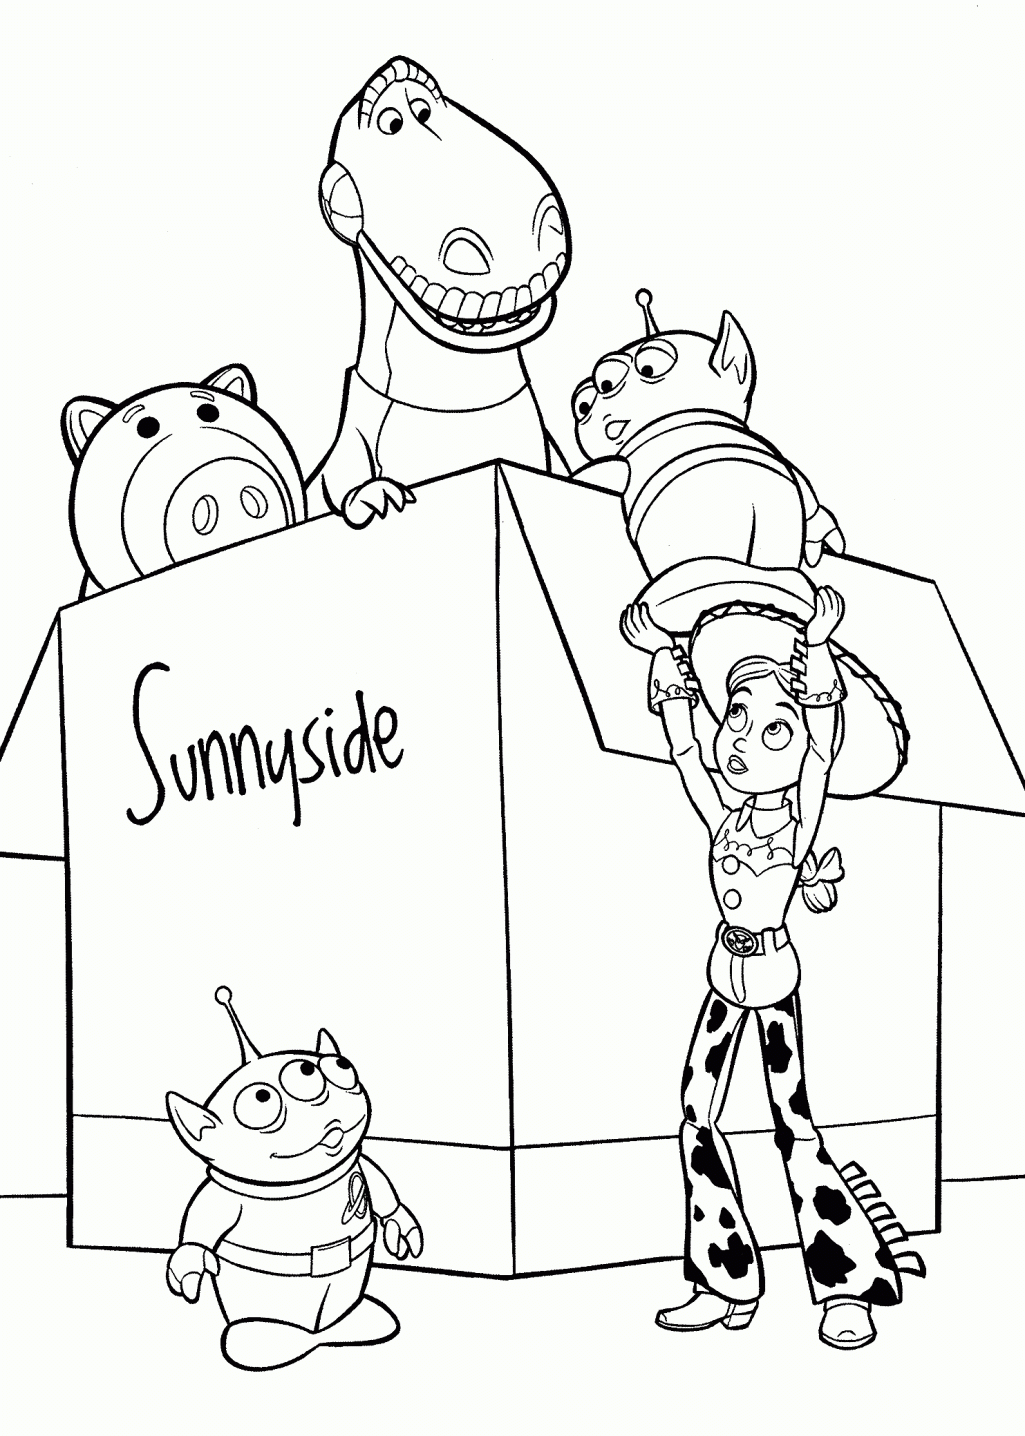 free-free-printable-disney-toy-story-coloring-pages-download-free-free